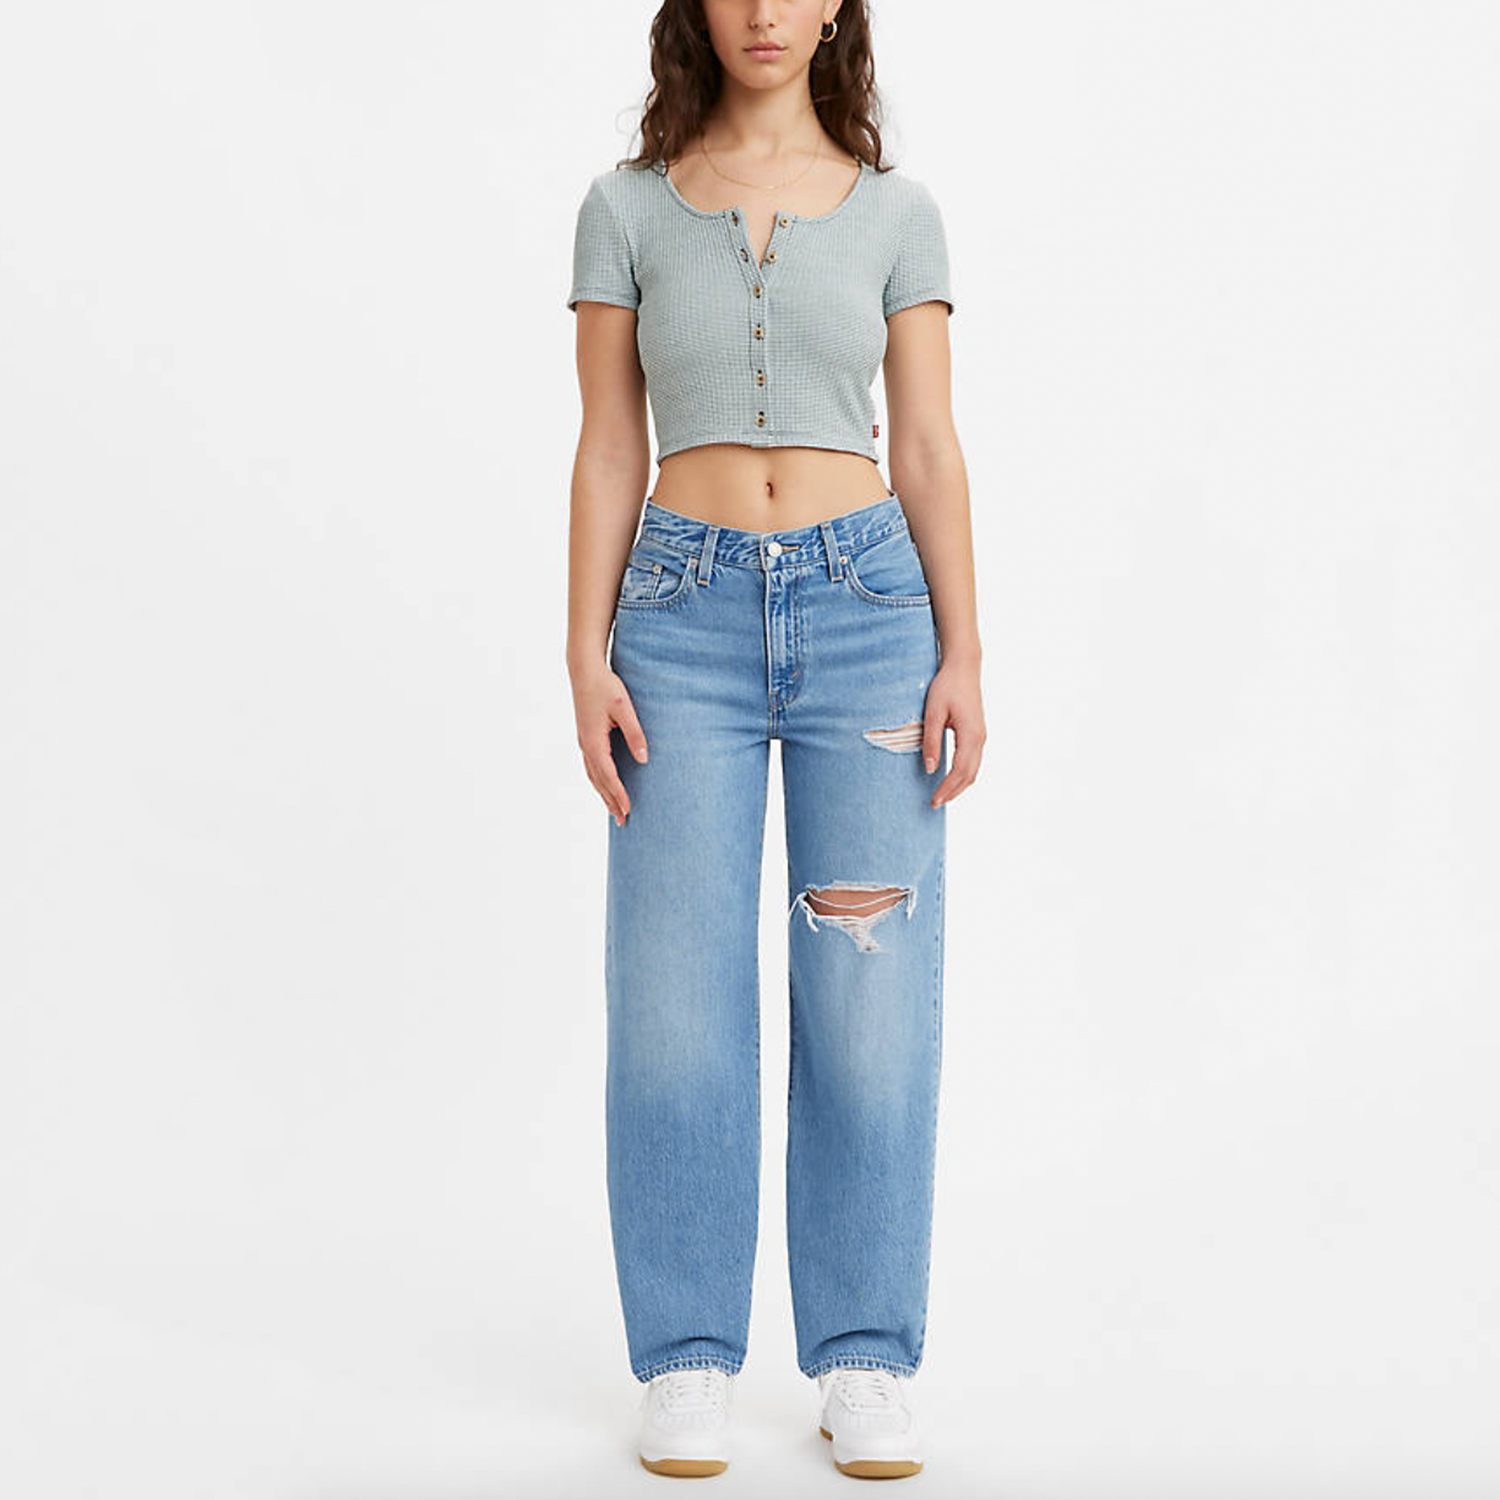 Levi's Baggy Dad Jean. The kind of jean you might steal from your dad's closet but baggier. These jeans have a mid rise and straight leg. This pair is relaxed yet flattering with extra room for a subtle edge. Throw on your favorite kicks for that chill ‘90s look any day of the week